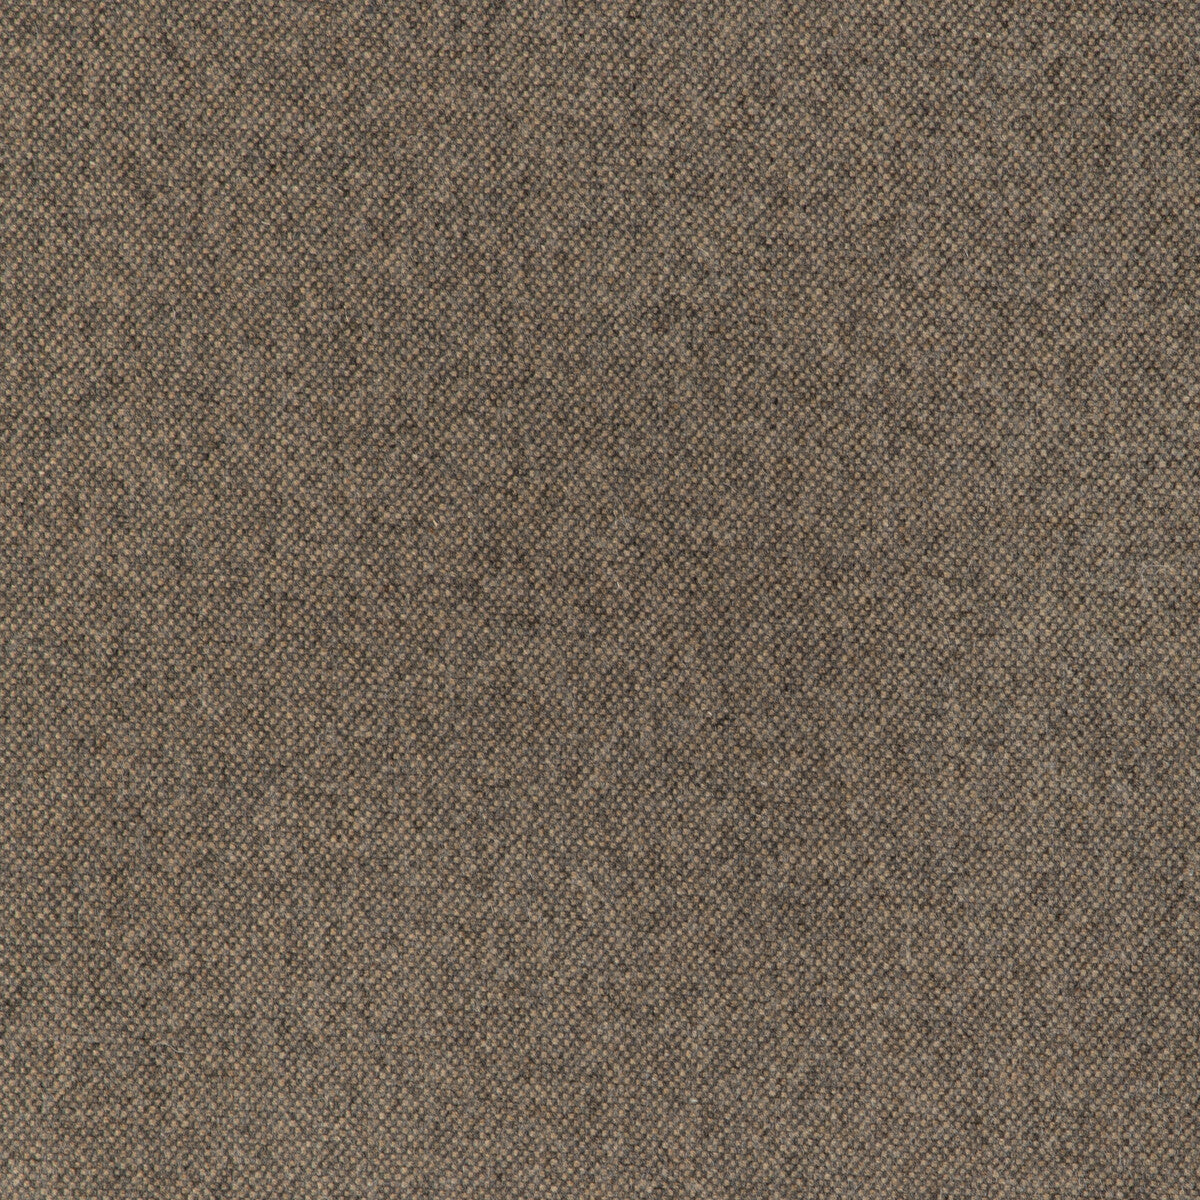 Manchester Wool fabric in biscotti color - pattern 37026.621.0 - by Kravet Contract